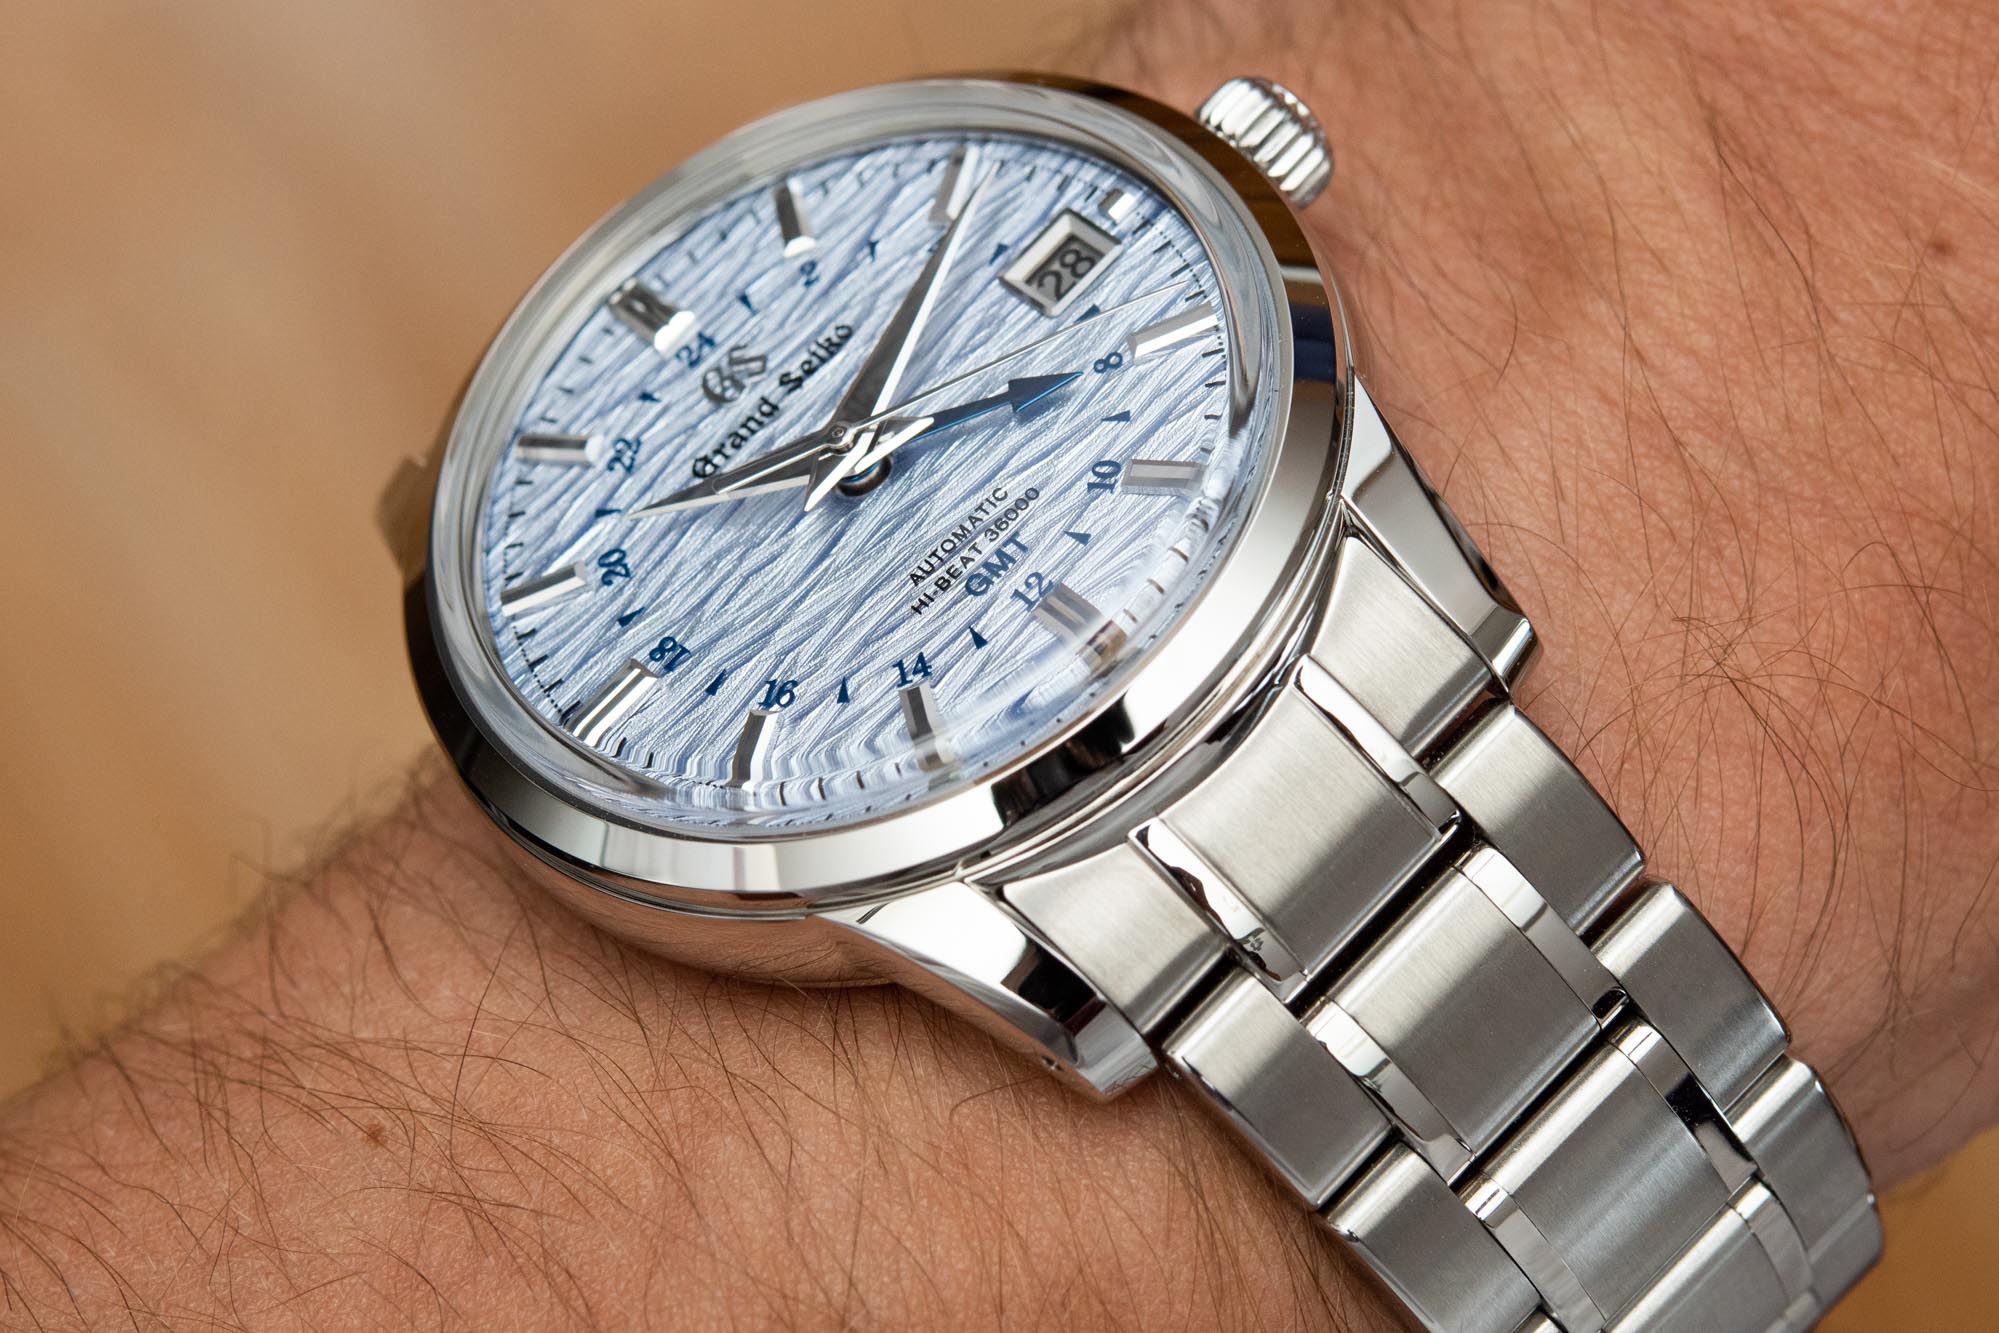 Hands-On With The Spectacular Grand Seiko SBGJ249 Shosho Hi-Beat Watch